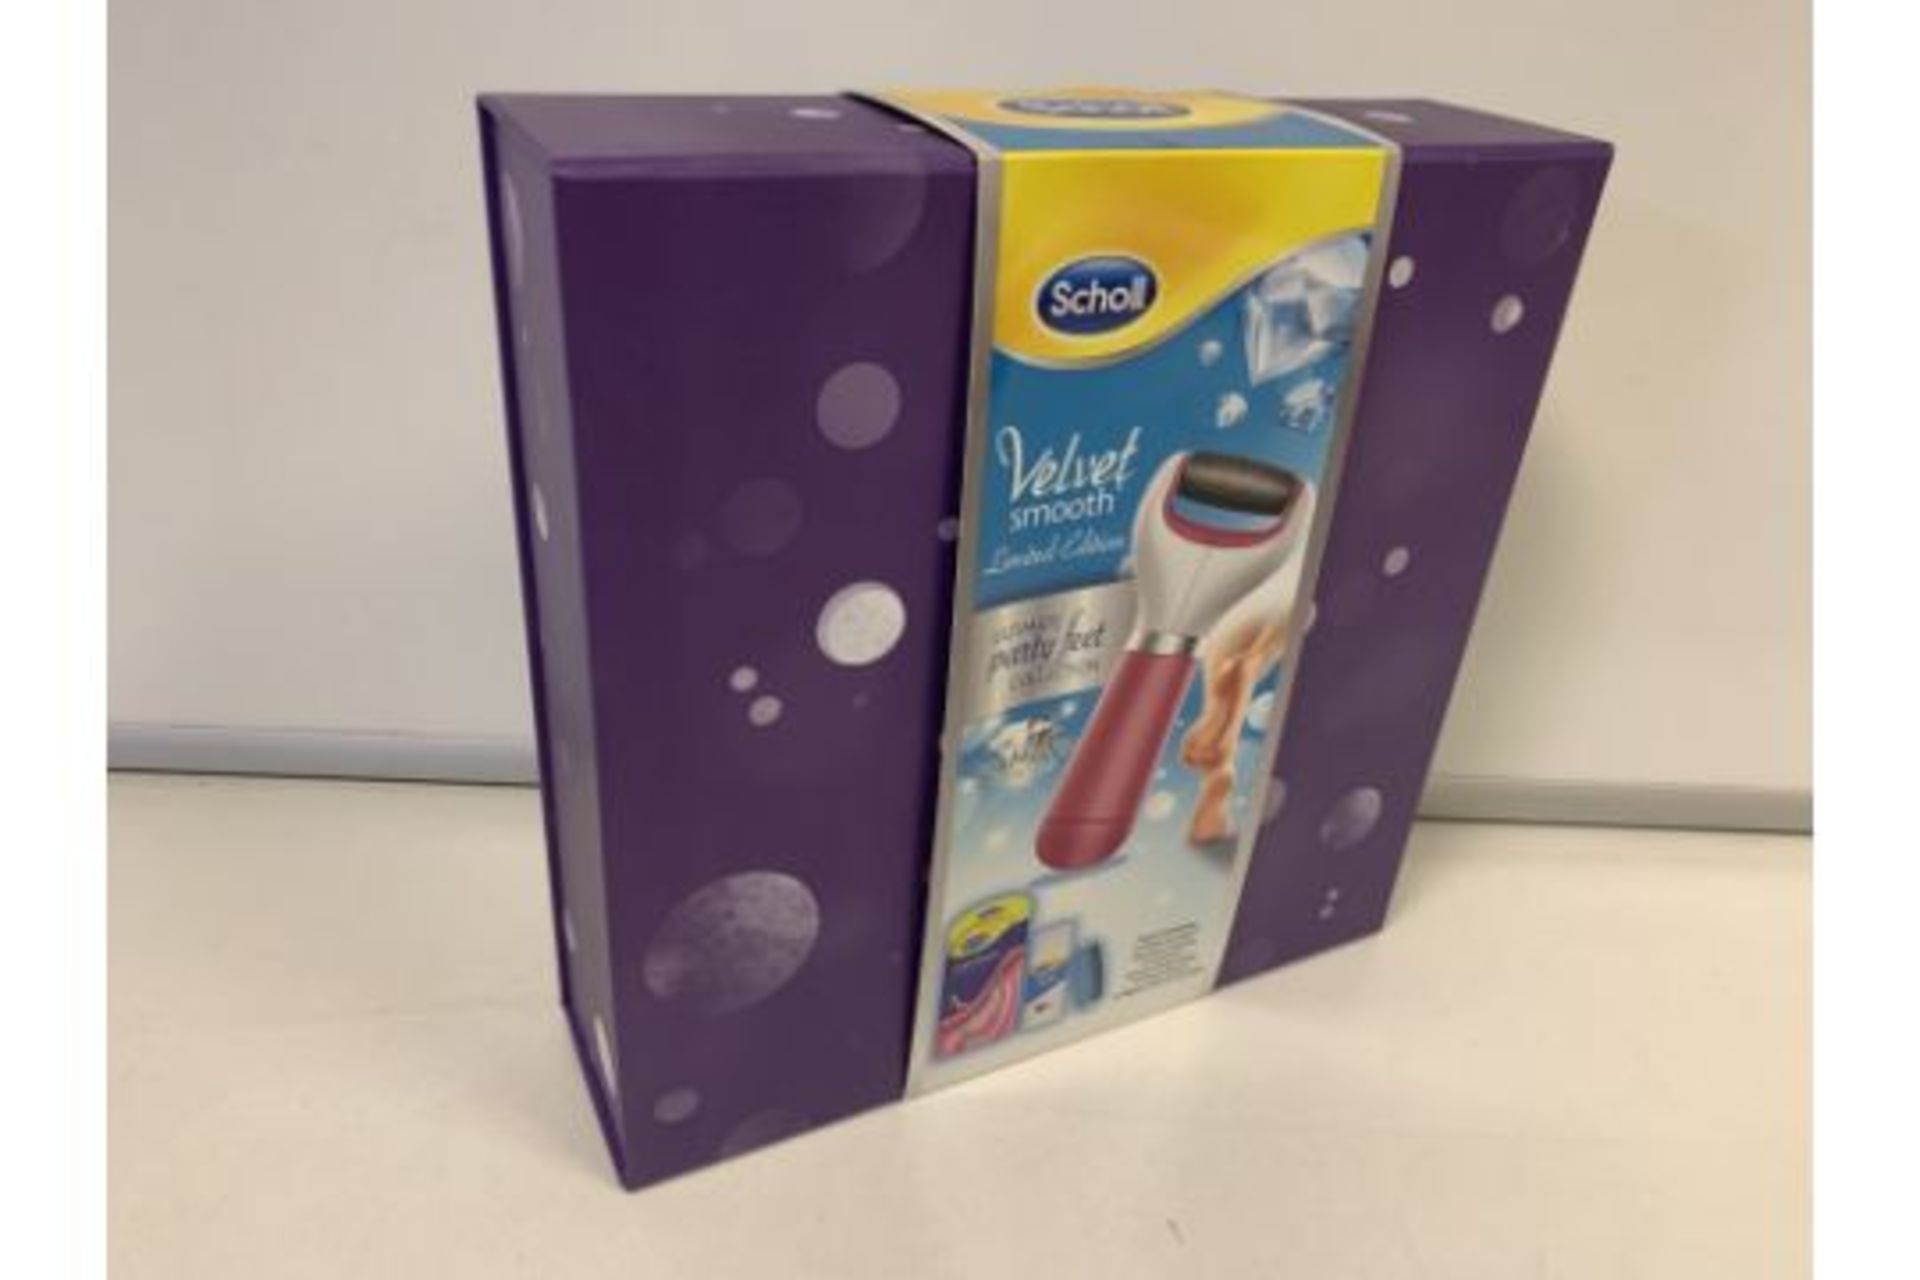 12 X BRAND NEW SCHOLL LIMITED EDITION VELVET SMOOTH ULTIMATE PARTY FEET COLLECTION WITH DIAMOND